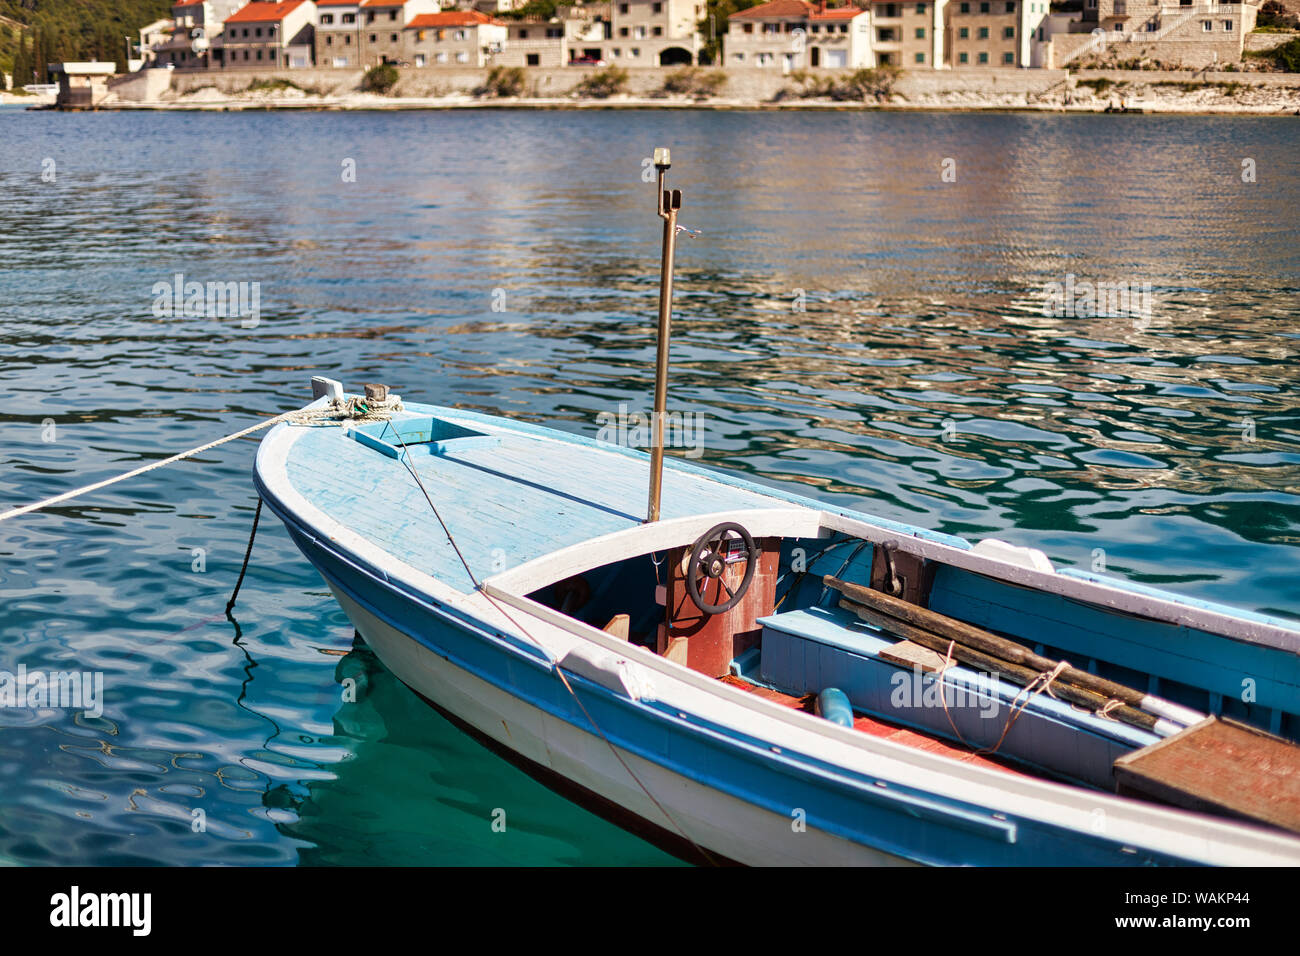 Pucisca, Brac Island, Croatia. Traditional fishing boat in the port. View of the city. The city famous from the sandstone from which the White House w Stock Photo